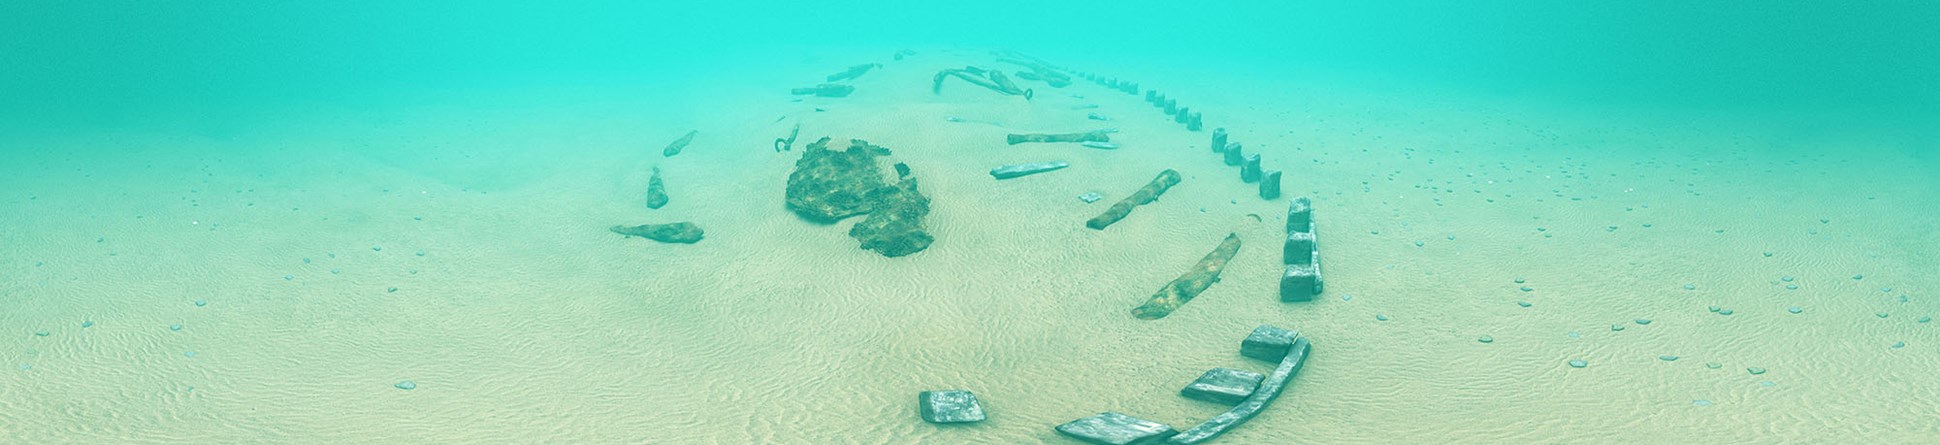 Screen shot from a virtual dive trail